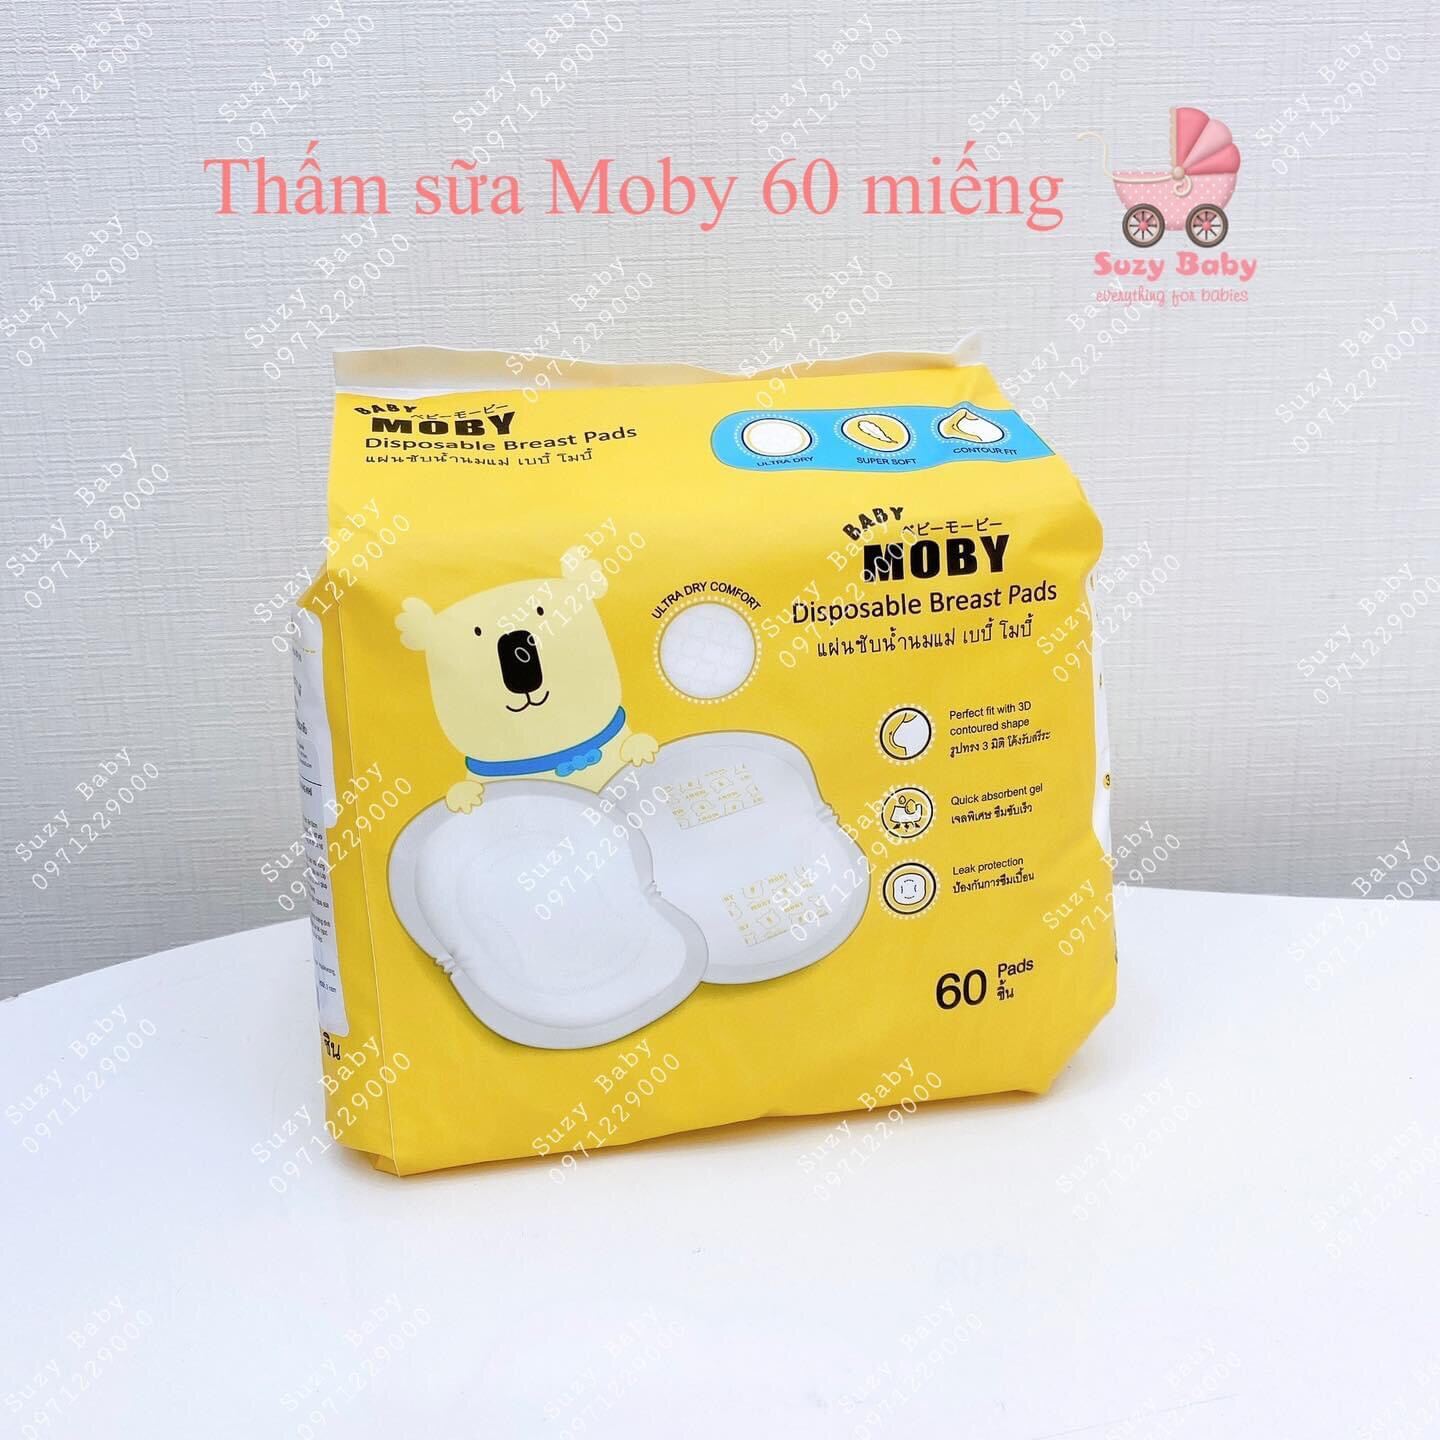 MIẾNG THẤM SỮA MOBY